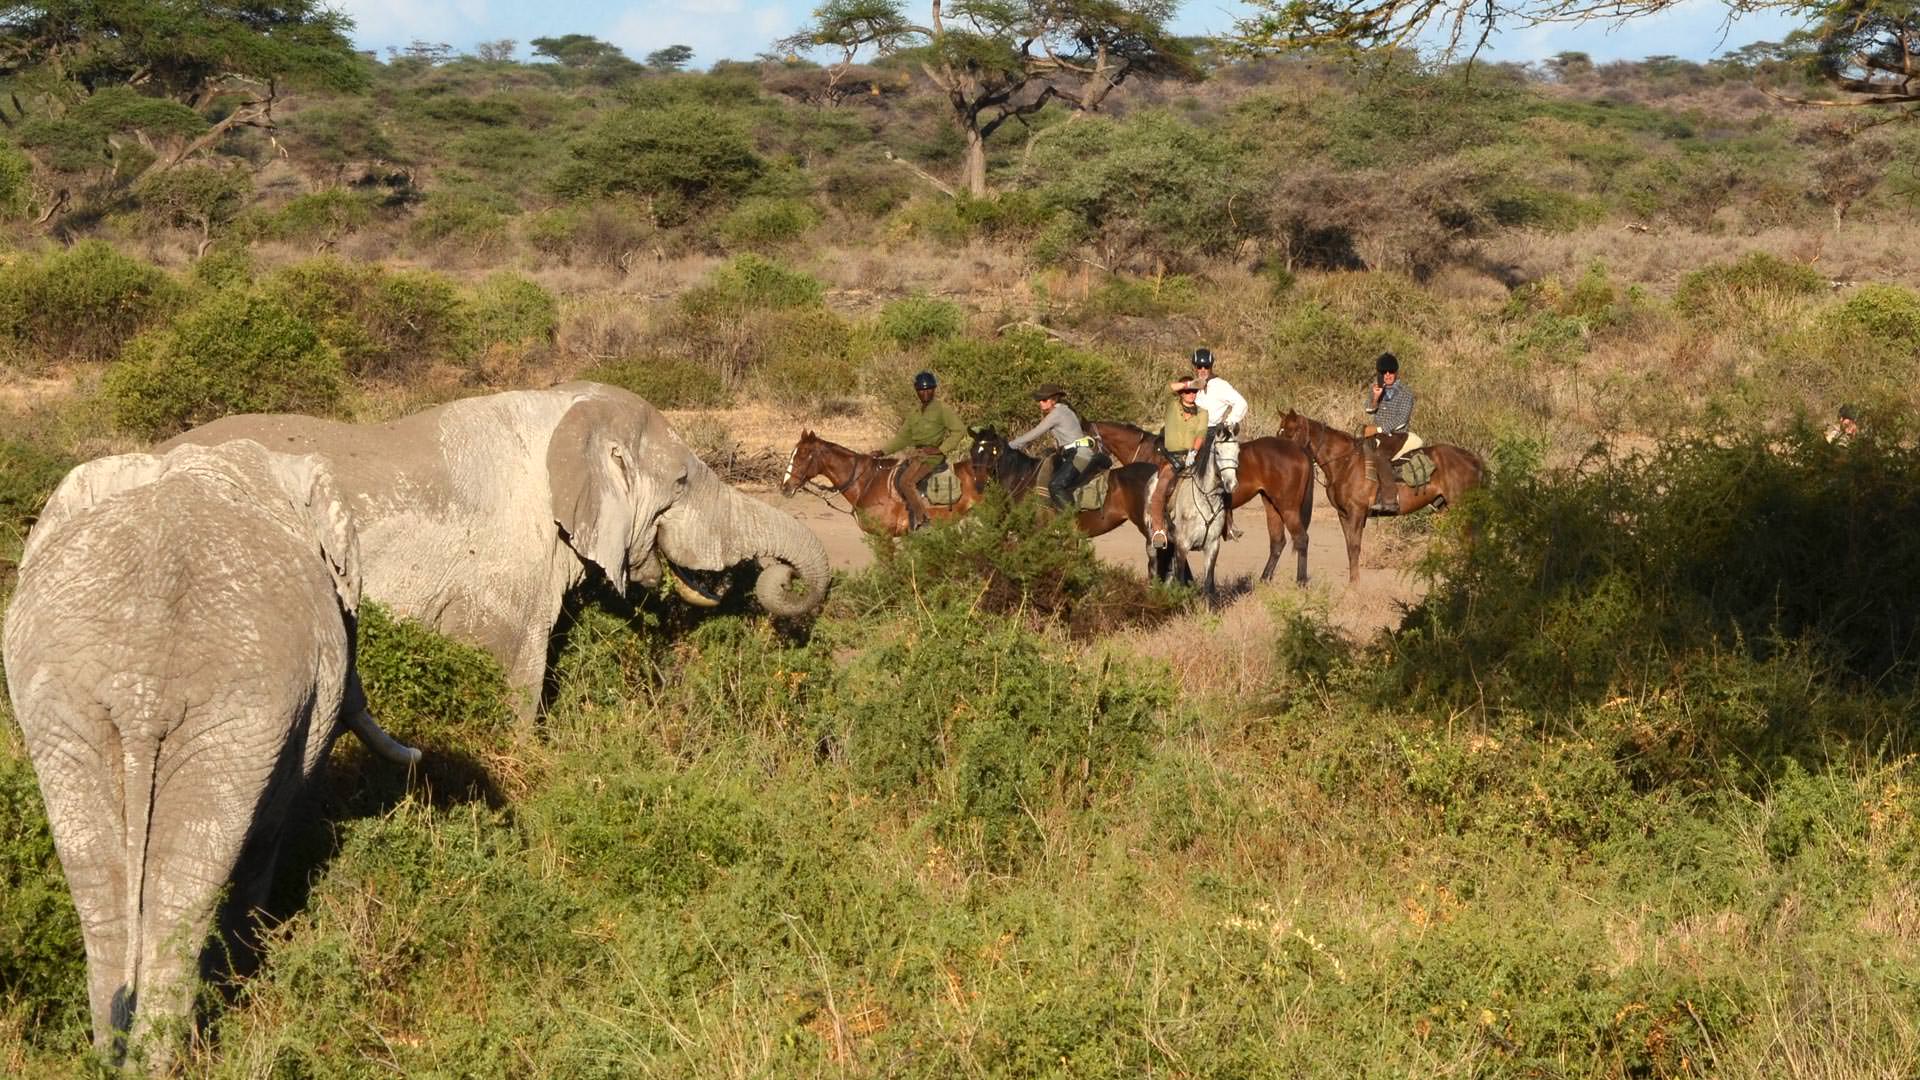 Watching elephants browse from horseback